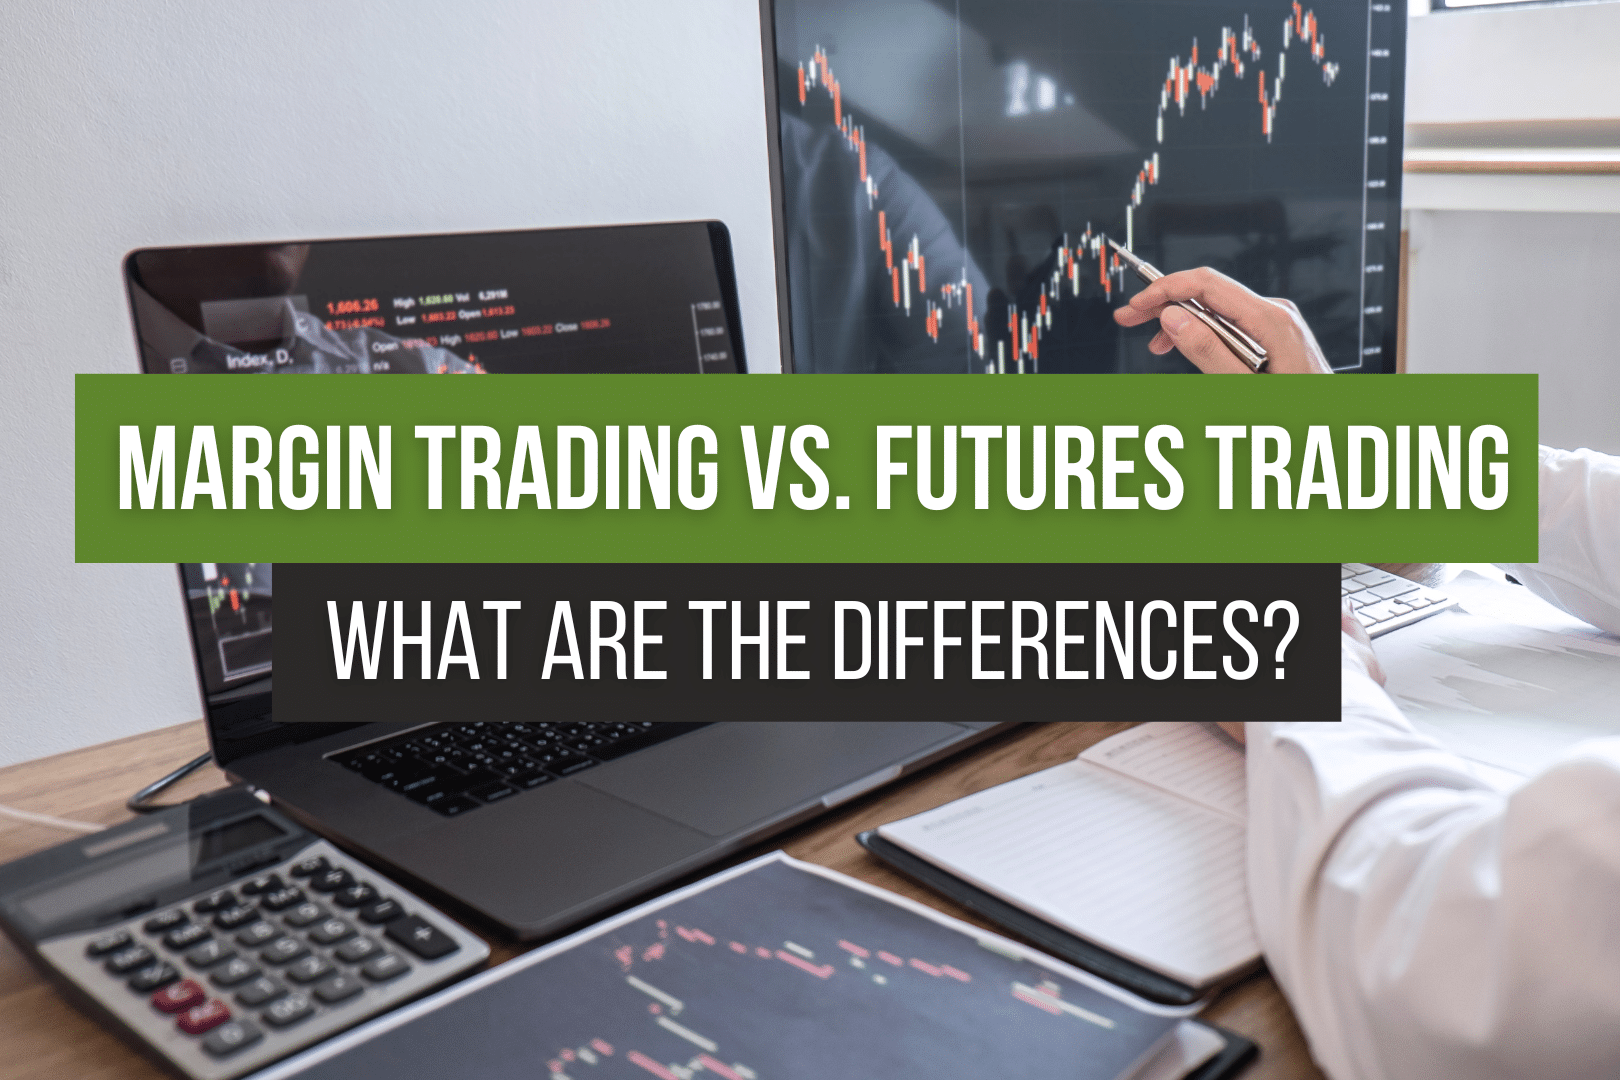 Margin trading and futures trading